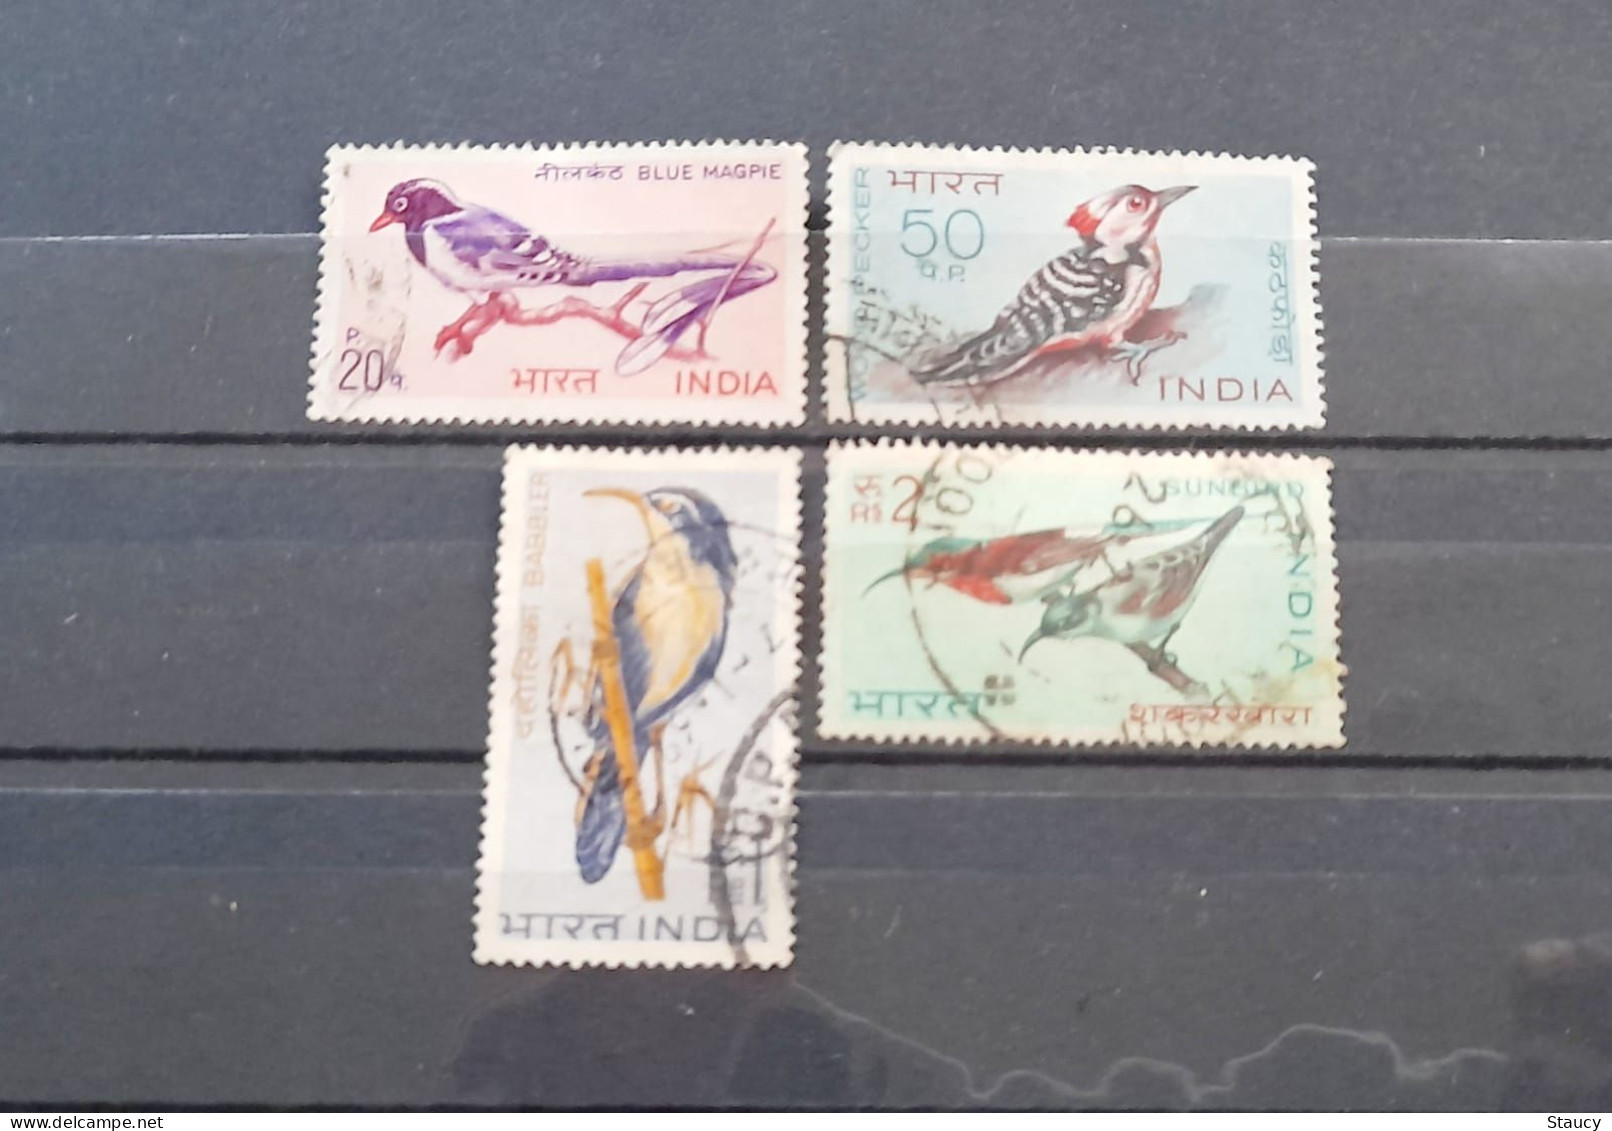 India 1968 BIRDS ~ Wildlife Preservation - Fauna / Birds Complete Set Of 4 Stamps USED (Cancellation Would Differ) - Gebraucht